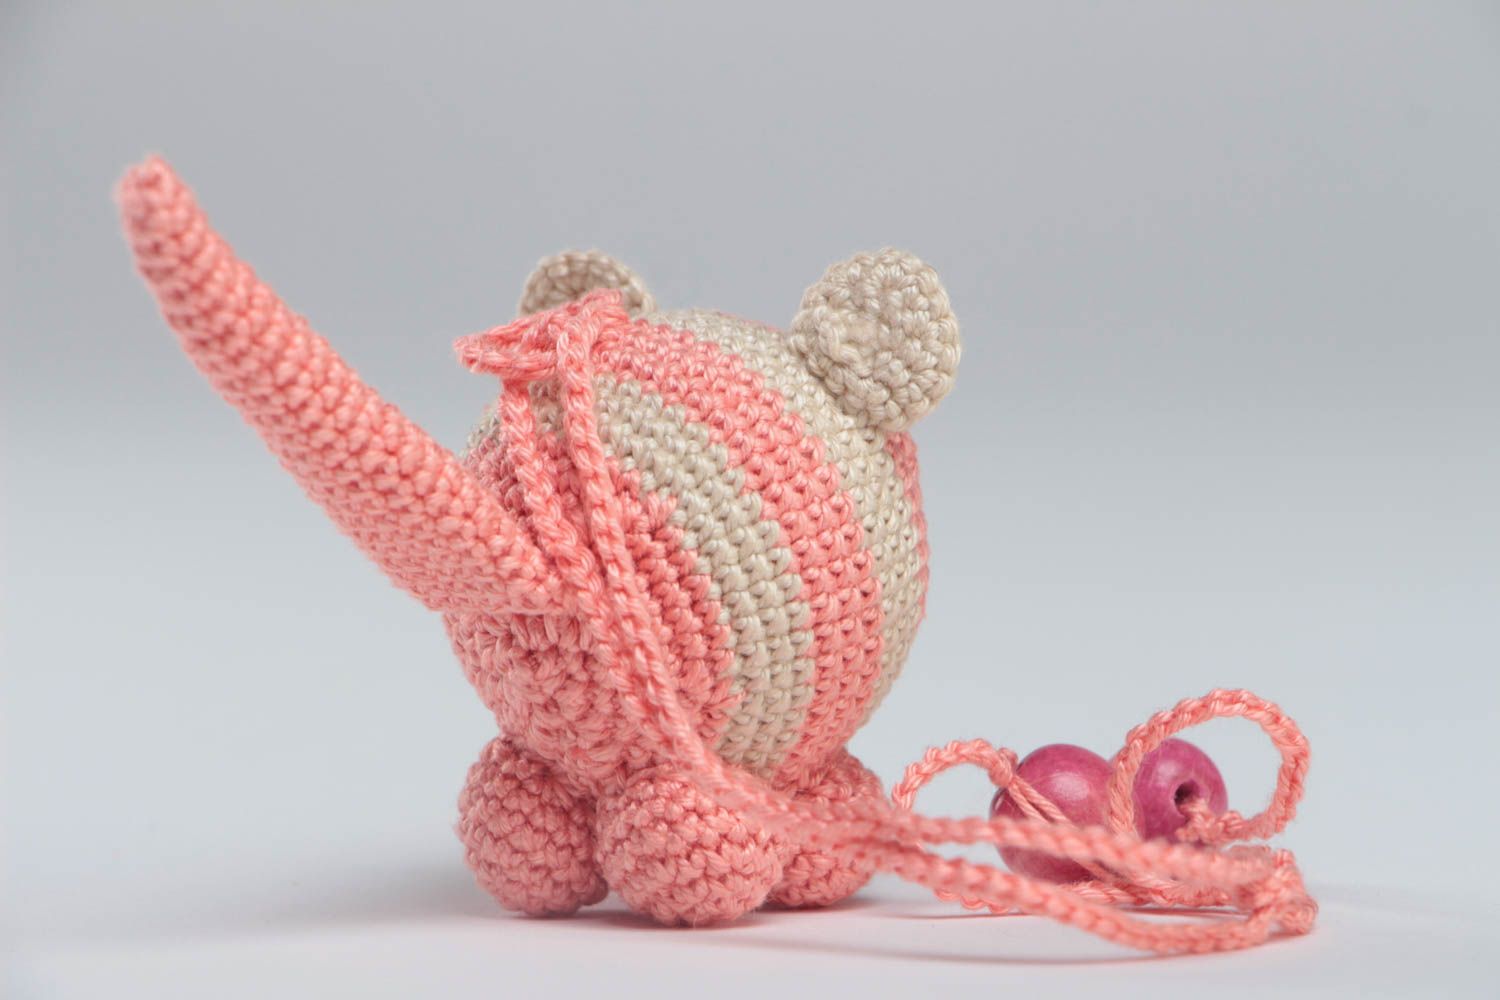 Crocheted cotton rattle small pink cat handmade toy for children and nursery photo 4